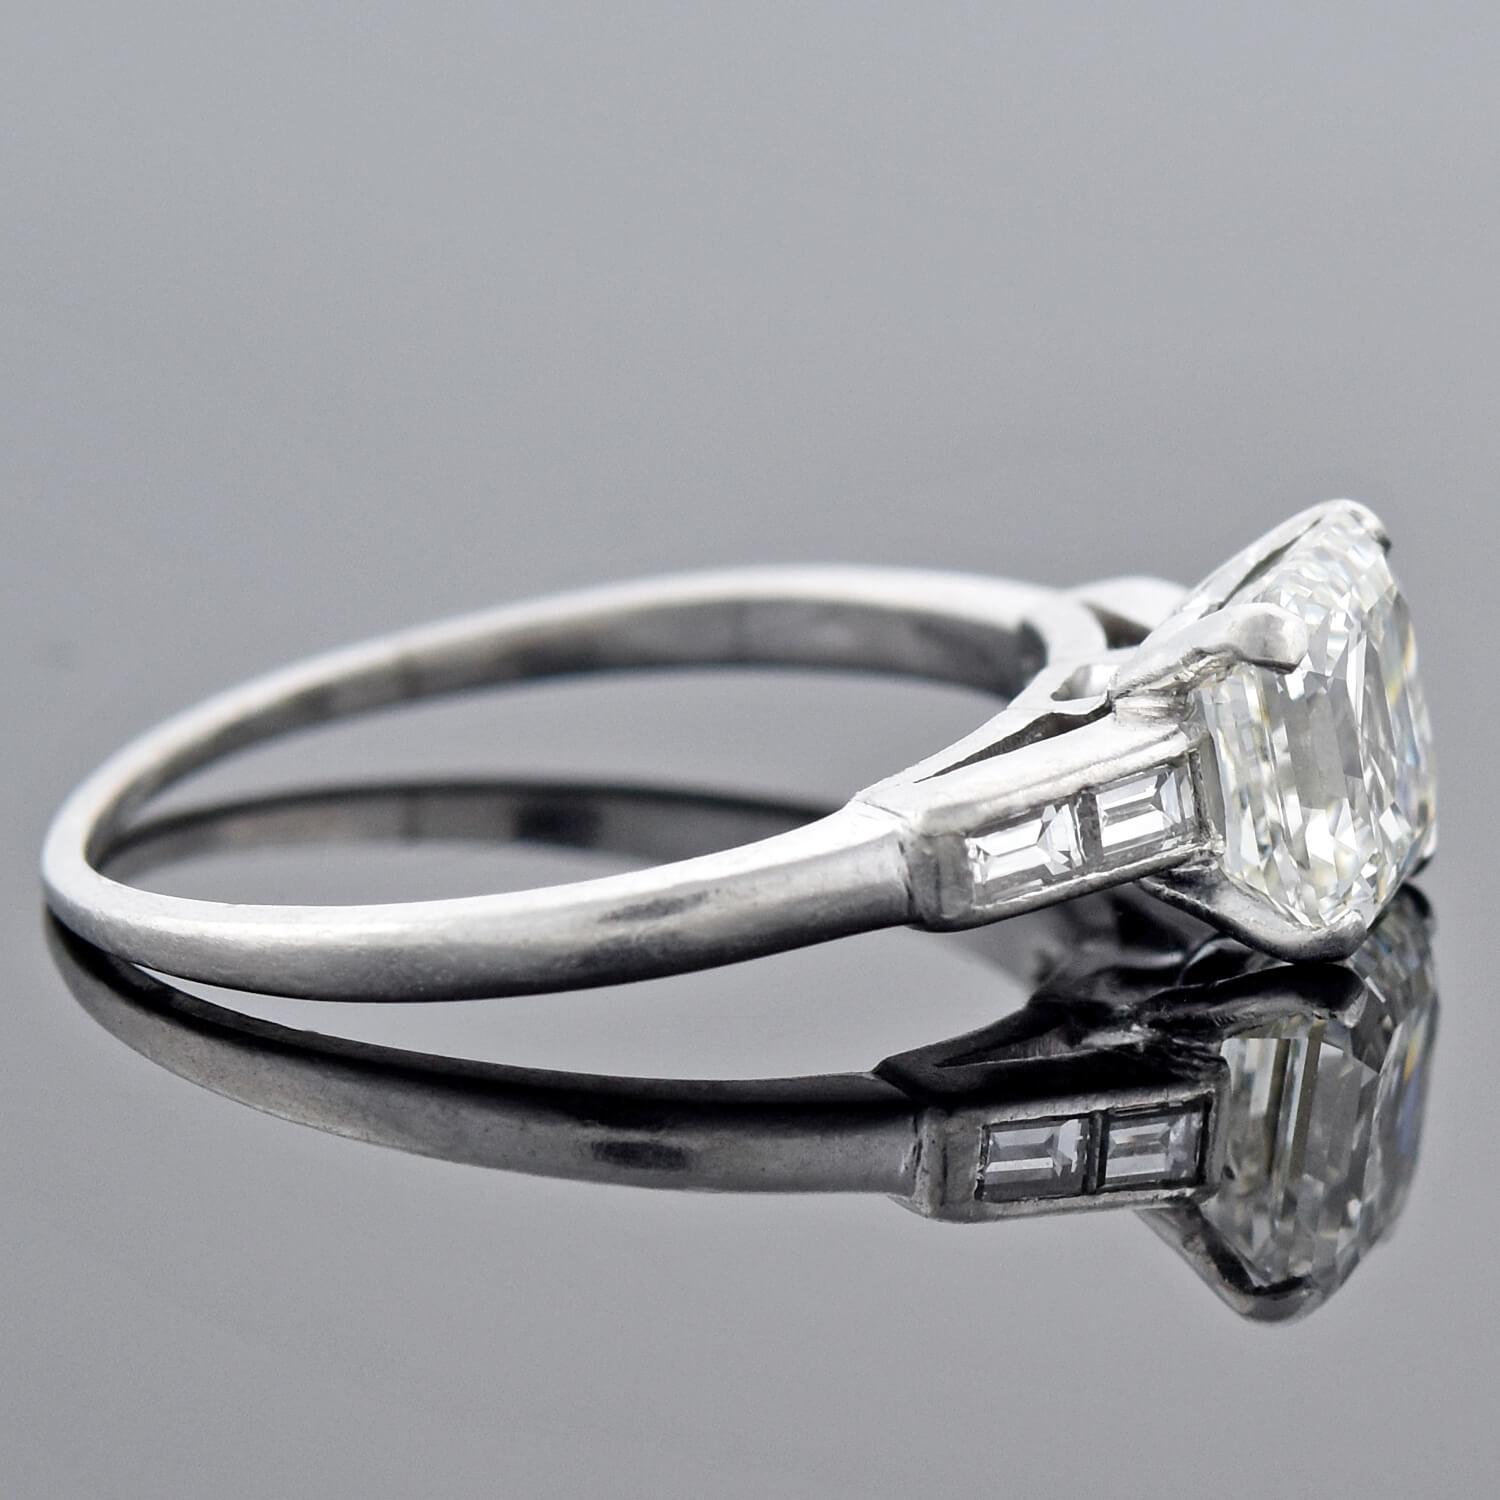 This diamond engagement ring from the late Art Deco (ca1930s) era is a breathtaking beauty! Resting at the center of a platinum setting is a stunning 1.50ct Asscher Cut diamond. This particular modification of an Emerald Cut diamond is also known as